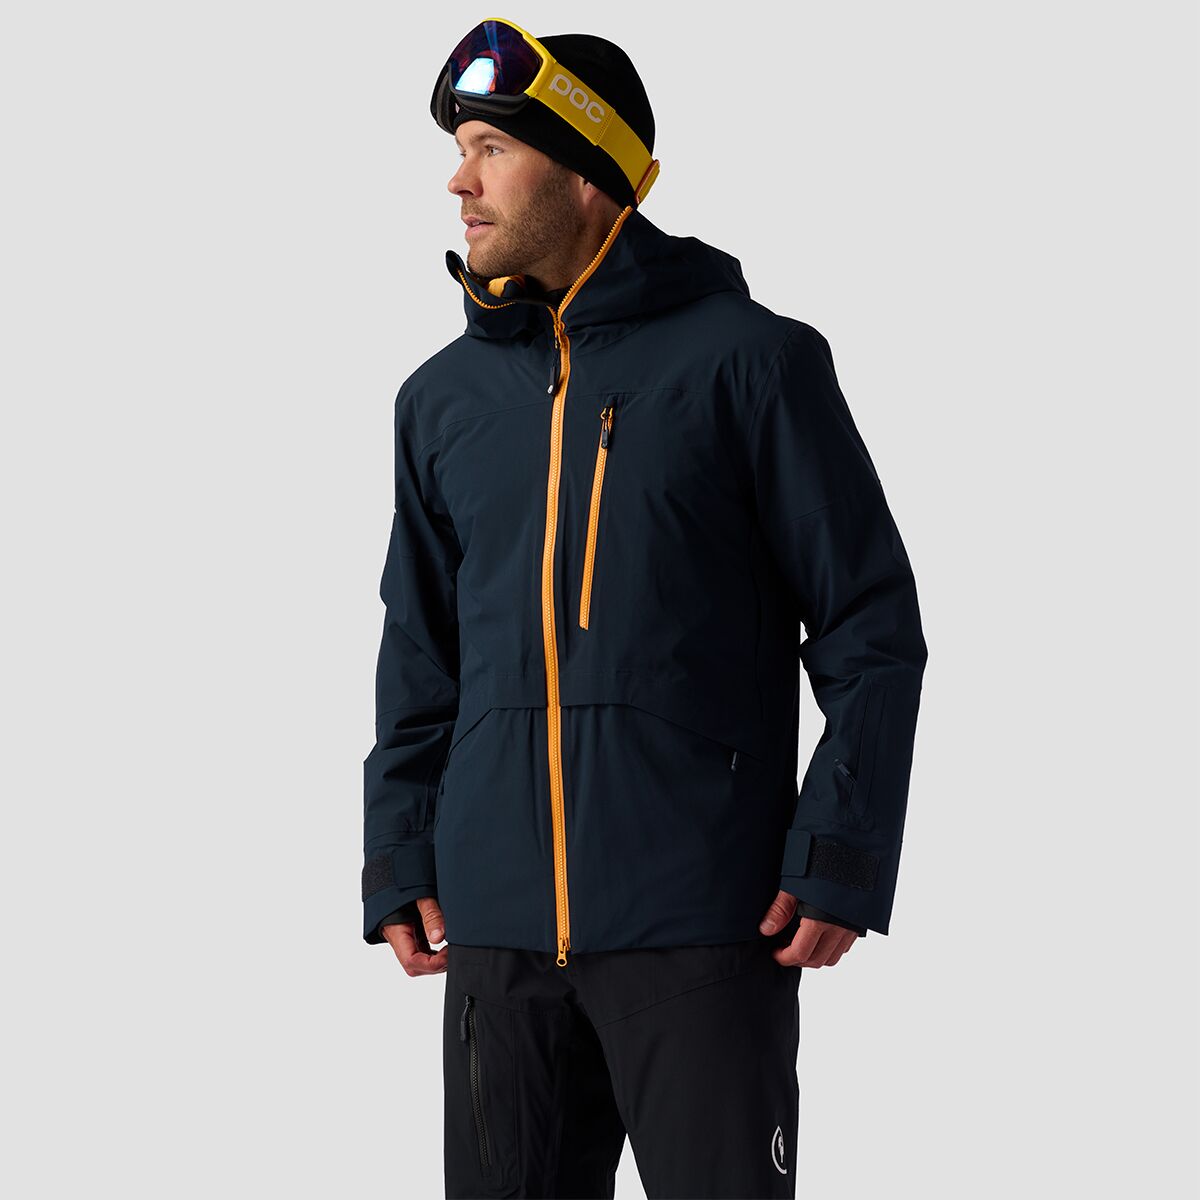 Backcountry Last Chair Stretch Insulated Jacket - Men's Carbon/Artisan's Gold